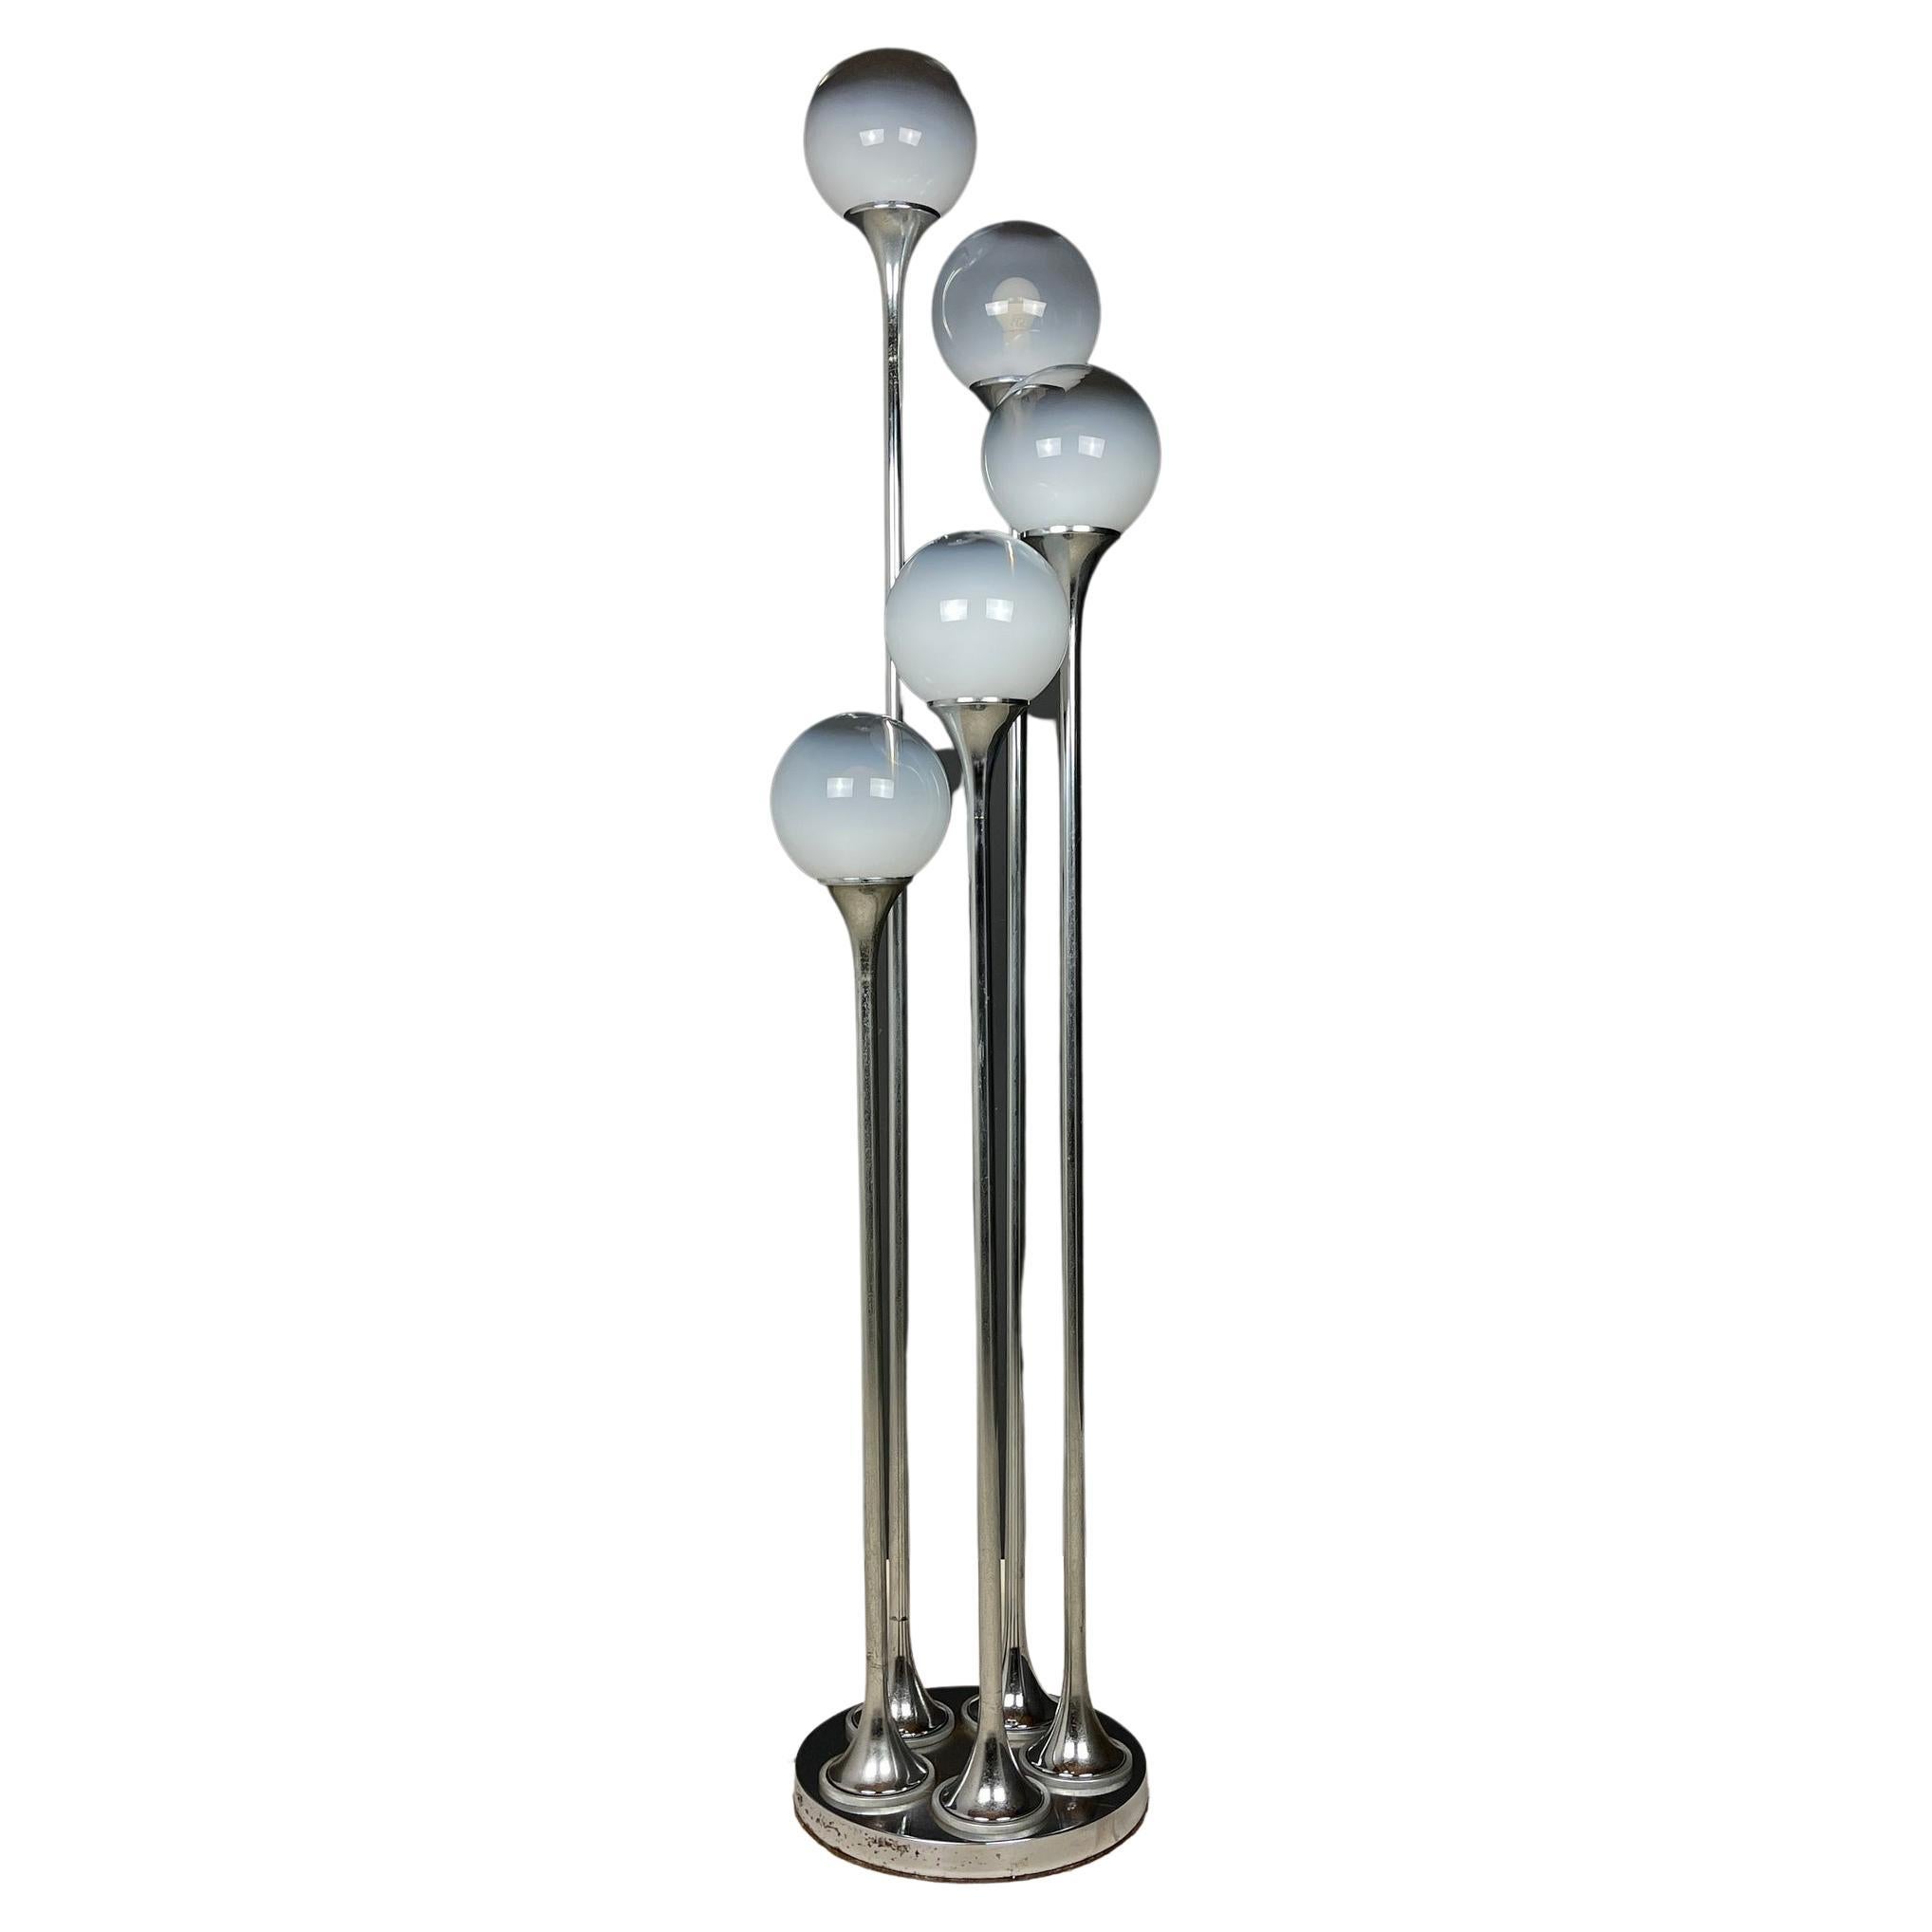 Midcentury Floor Lamp by Targetti Sankey Italy 1960s For Sale